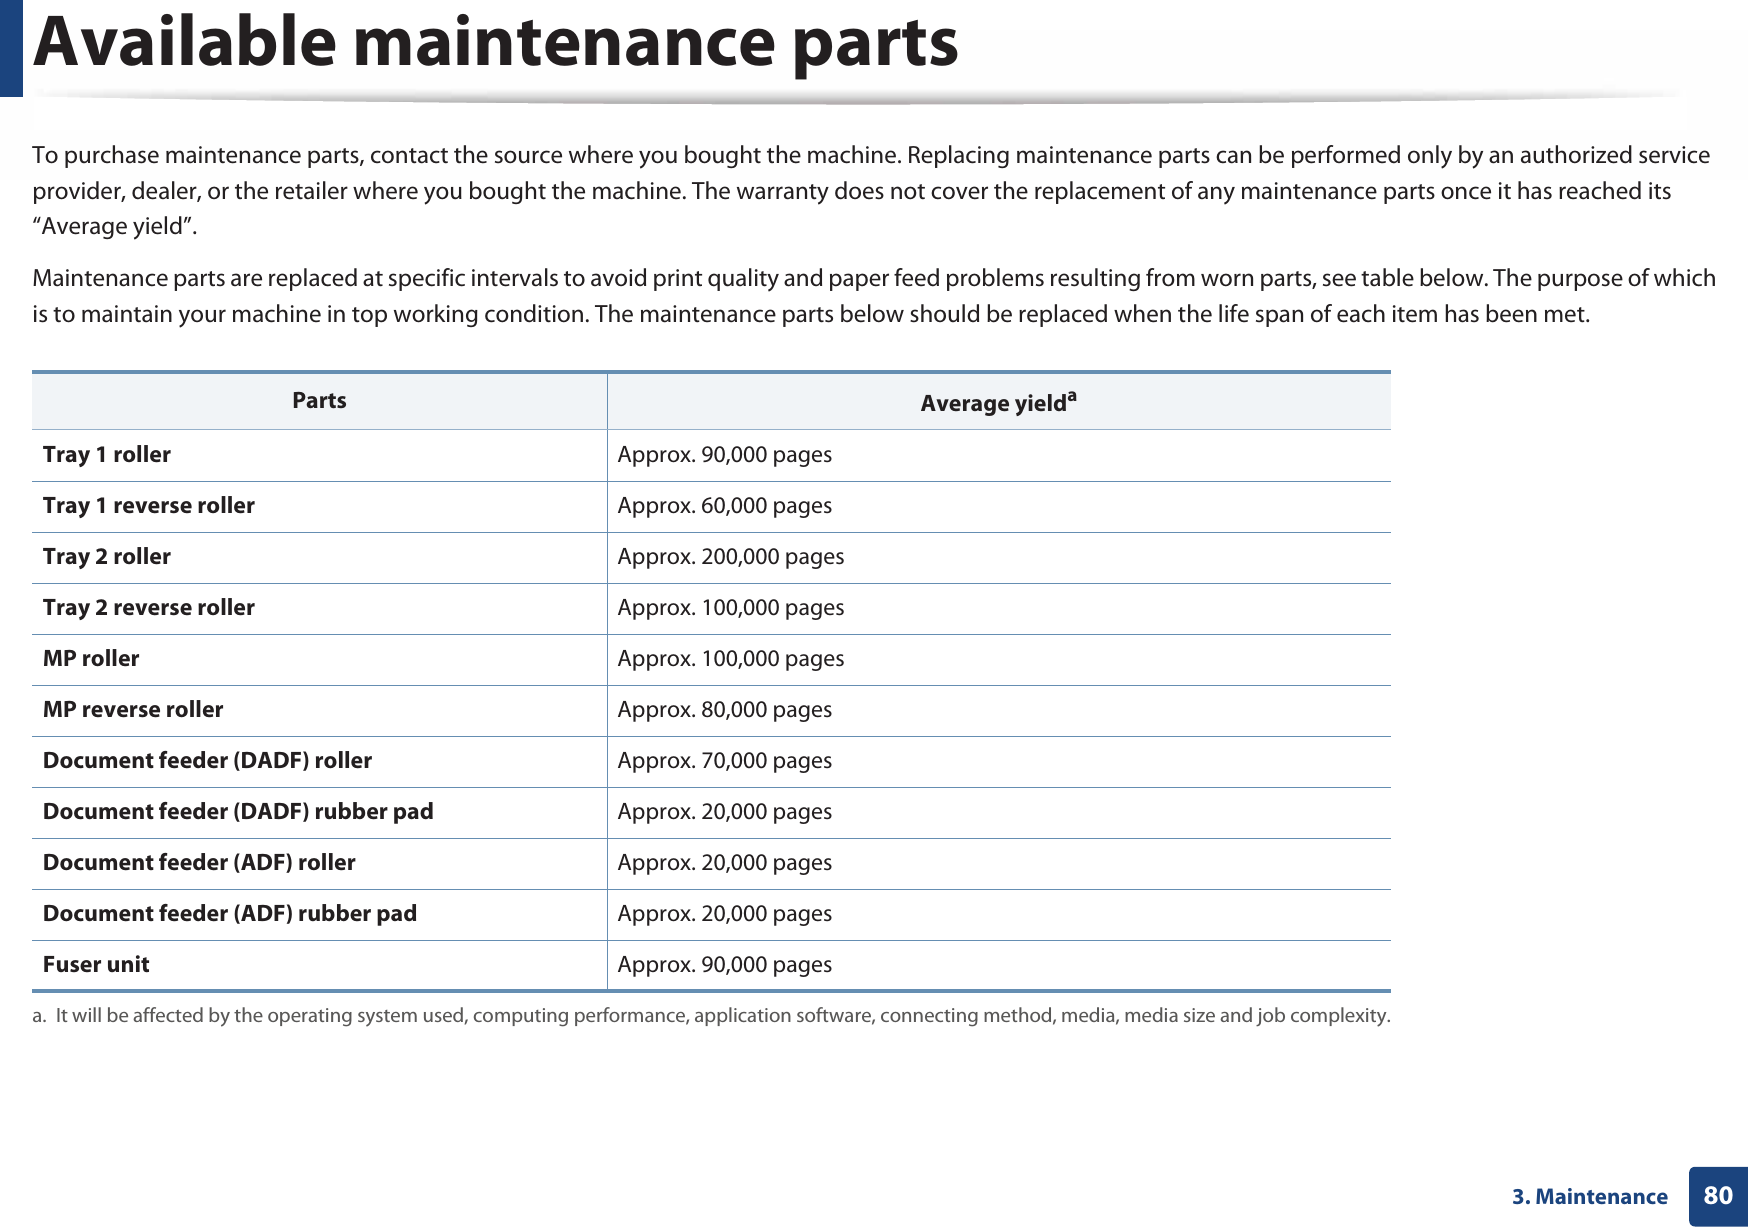 803. MaintenanceAvailable maintenance partsTo purchase maintenance parts, contact the source where you bought the machine. Replacing maintenance parts can be performed only by an authorized service provider, dealer, or the retailer where you bought the machine. The warranty does not cover the replacement of any maintenance parts once it has reached its “Average yield”.Maintenance parts are replaced at specific intervals to avoid print quality and paper feed problems resulting from worn parts, see table below. The purpose of which is to maintain your machine in top working condition. The maintenance parts below should be replaced when the life span of each item has been met.Parts Average yieldaa. It will be affected by the operating system used, computing performance, application software, connecting method, media, media size and job complexity.Tray 1 roller Approx. 90,000 pagesTray 1 reverse roller Approx. 60,000 pagesTray 2 roller Approx. 200,000 pagesTray 2 reverse roller Approx. 100,000 pagesMP roller Approx. 100,000 pagesMP reverse roller Approx. 80,000 pagesDocument feeder (DADF) roller Approx. 70,000 pagesDocument feeder (DADF) rubber pad Approx. 20,000 pagesDocument feeder (ADF) roller Approx. 20,000 pagesDocument feeder (ADF) rubber pad Approx. 20,000 pagesFuser unit Approx. 90,000 pages